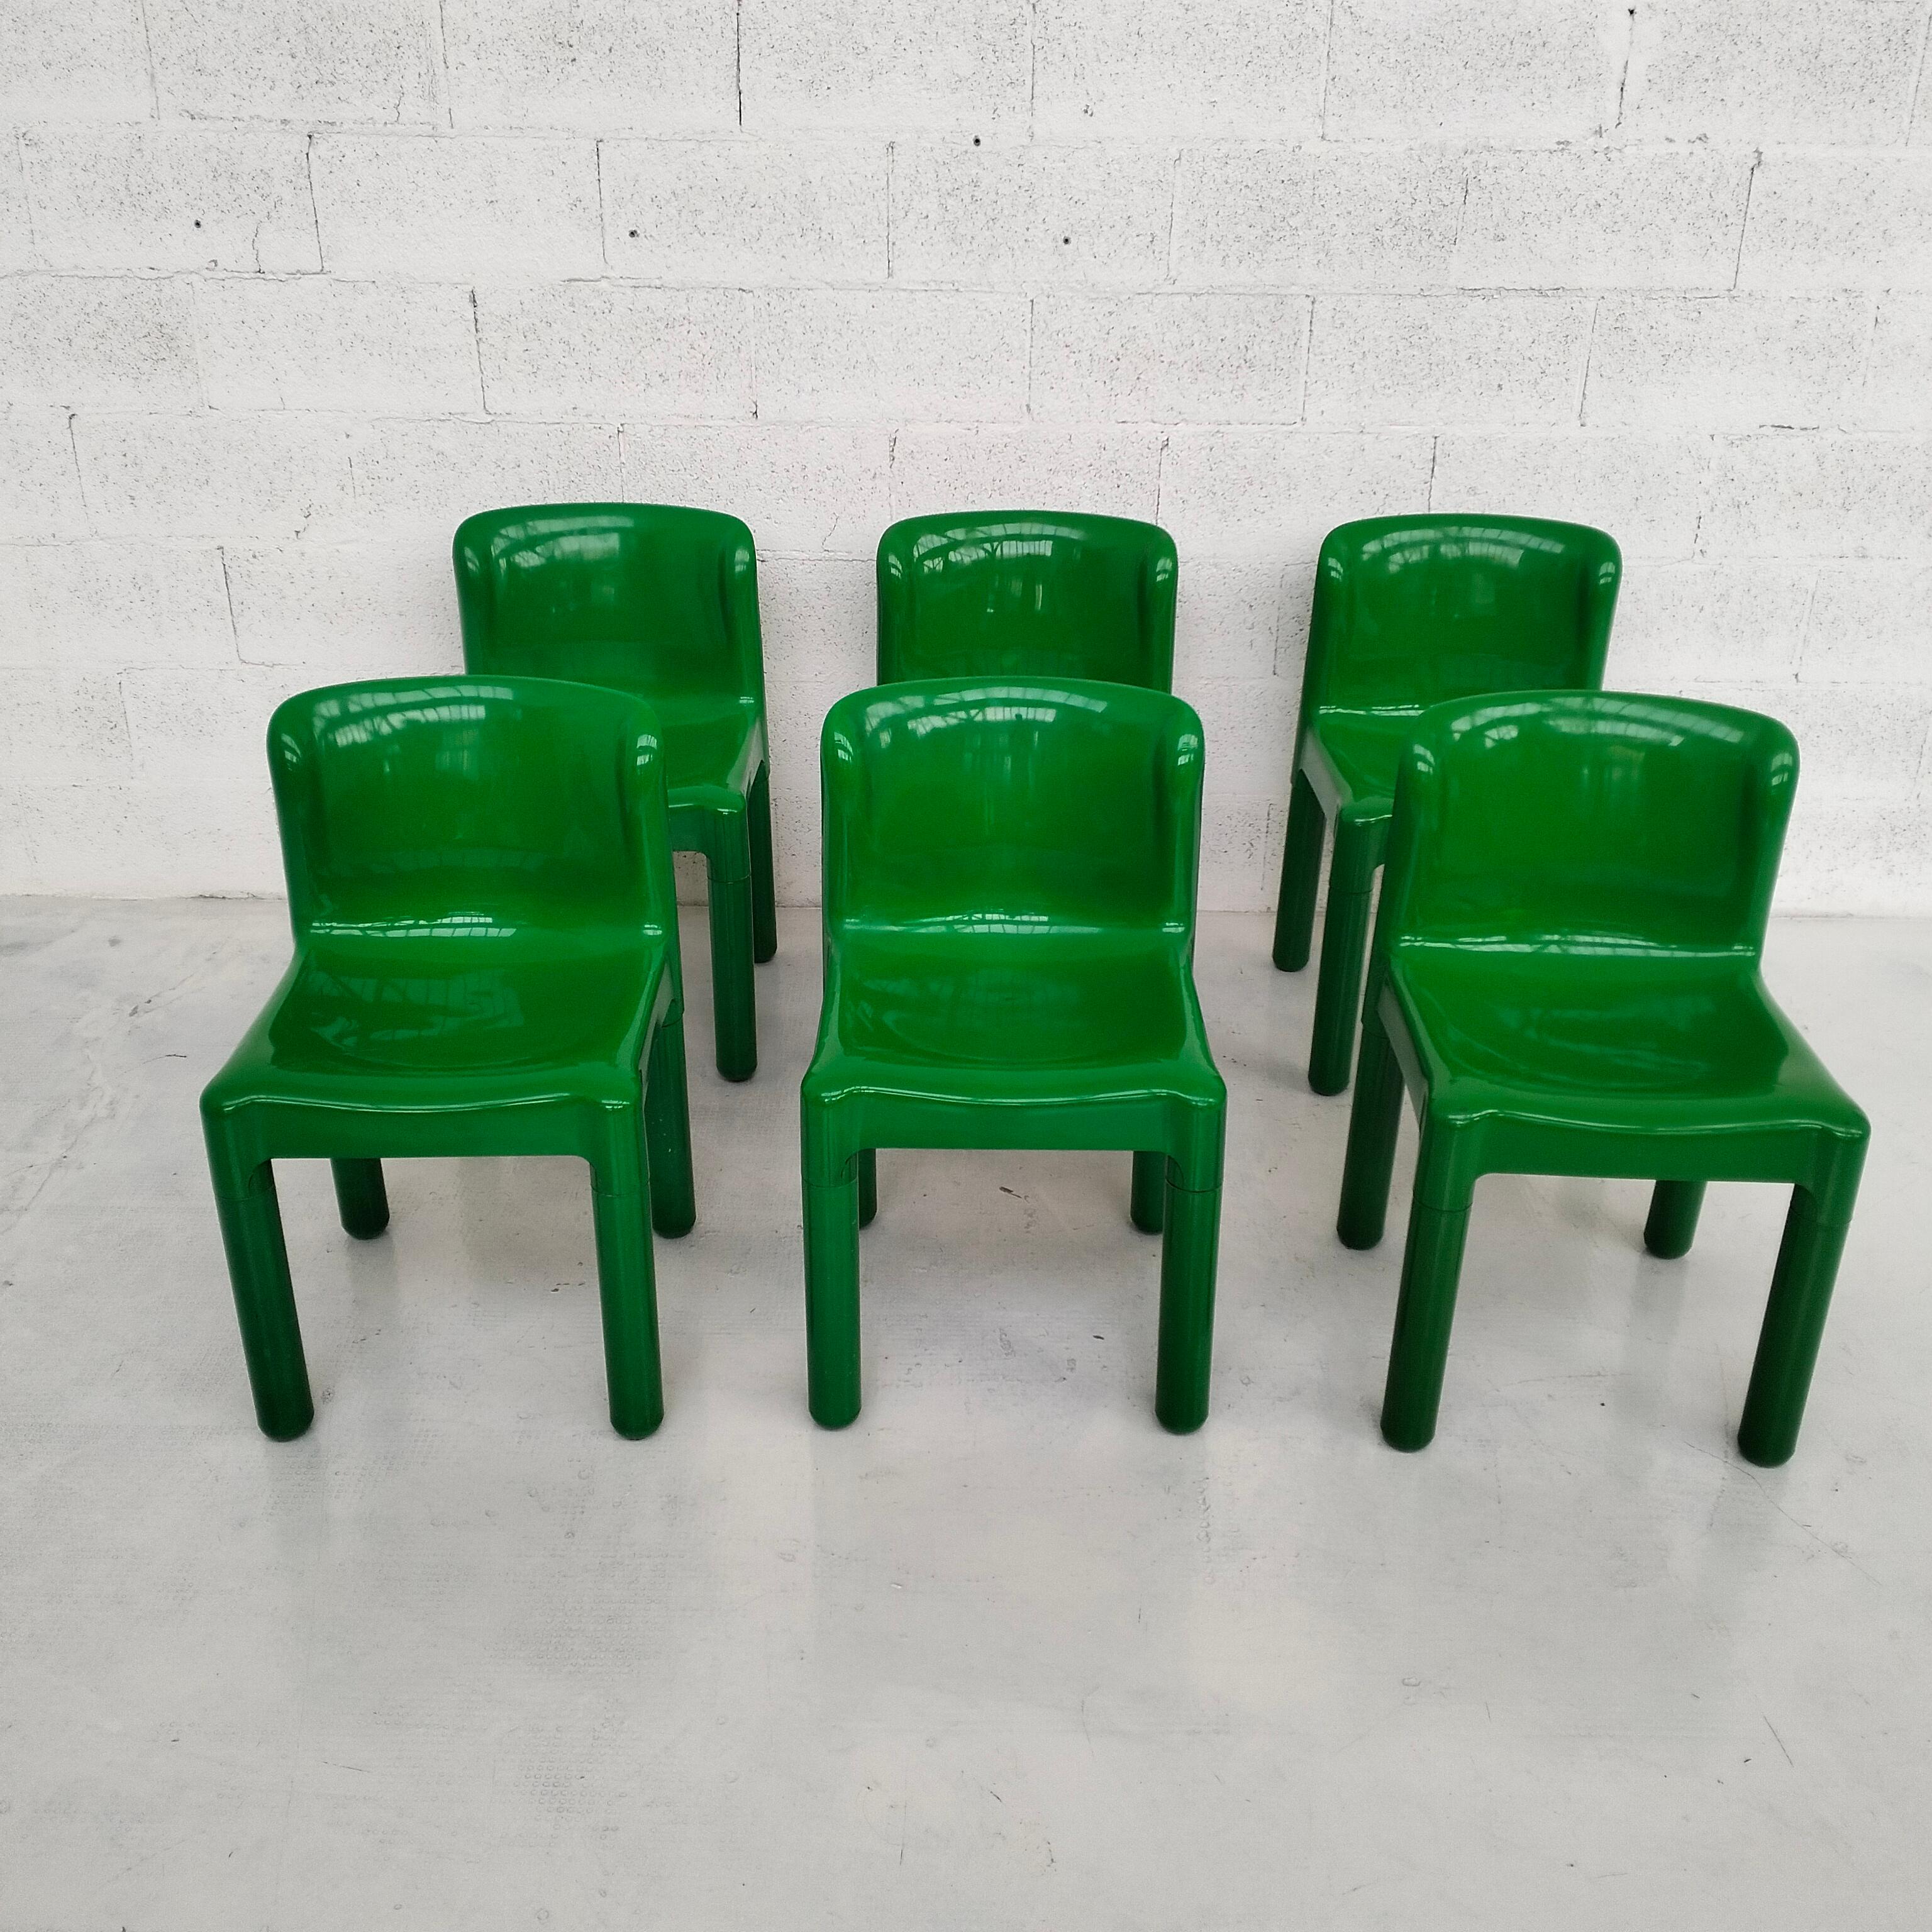 Mid-Century Modern Green Plastic Chairs 4875 by Carlo Bartoli for Kartell 1970s, Set of 6 For Sale